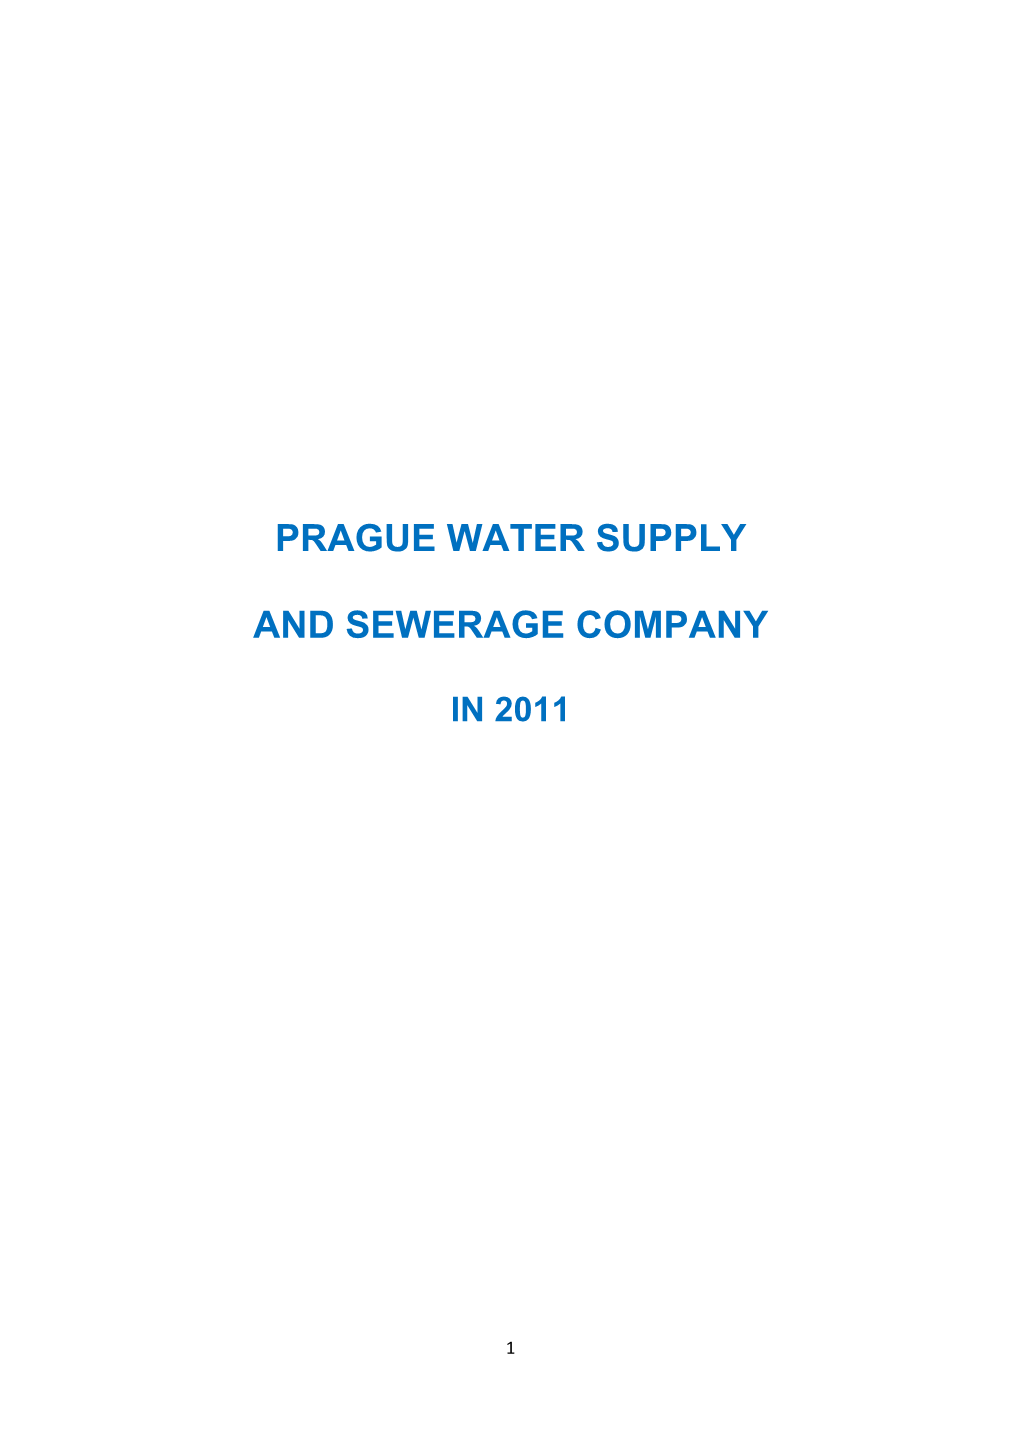 Prague Water Supply and Sewerage Company